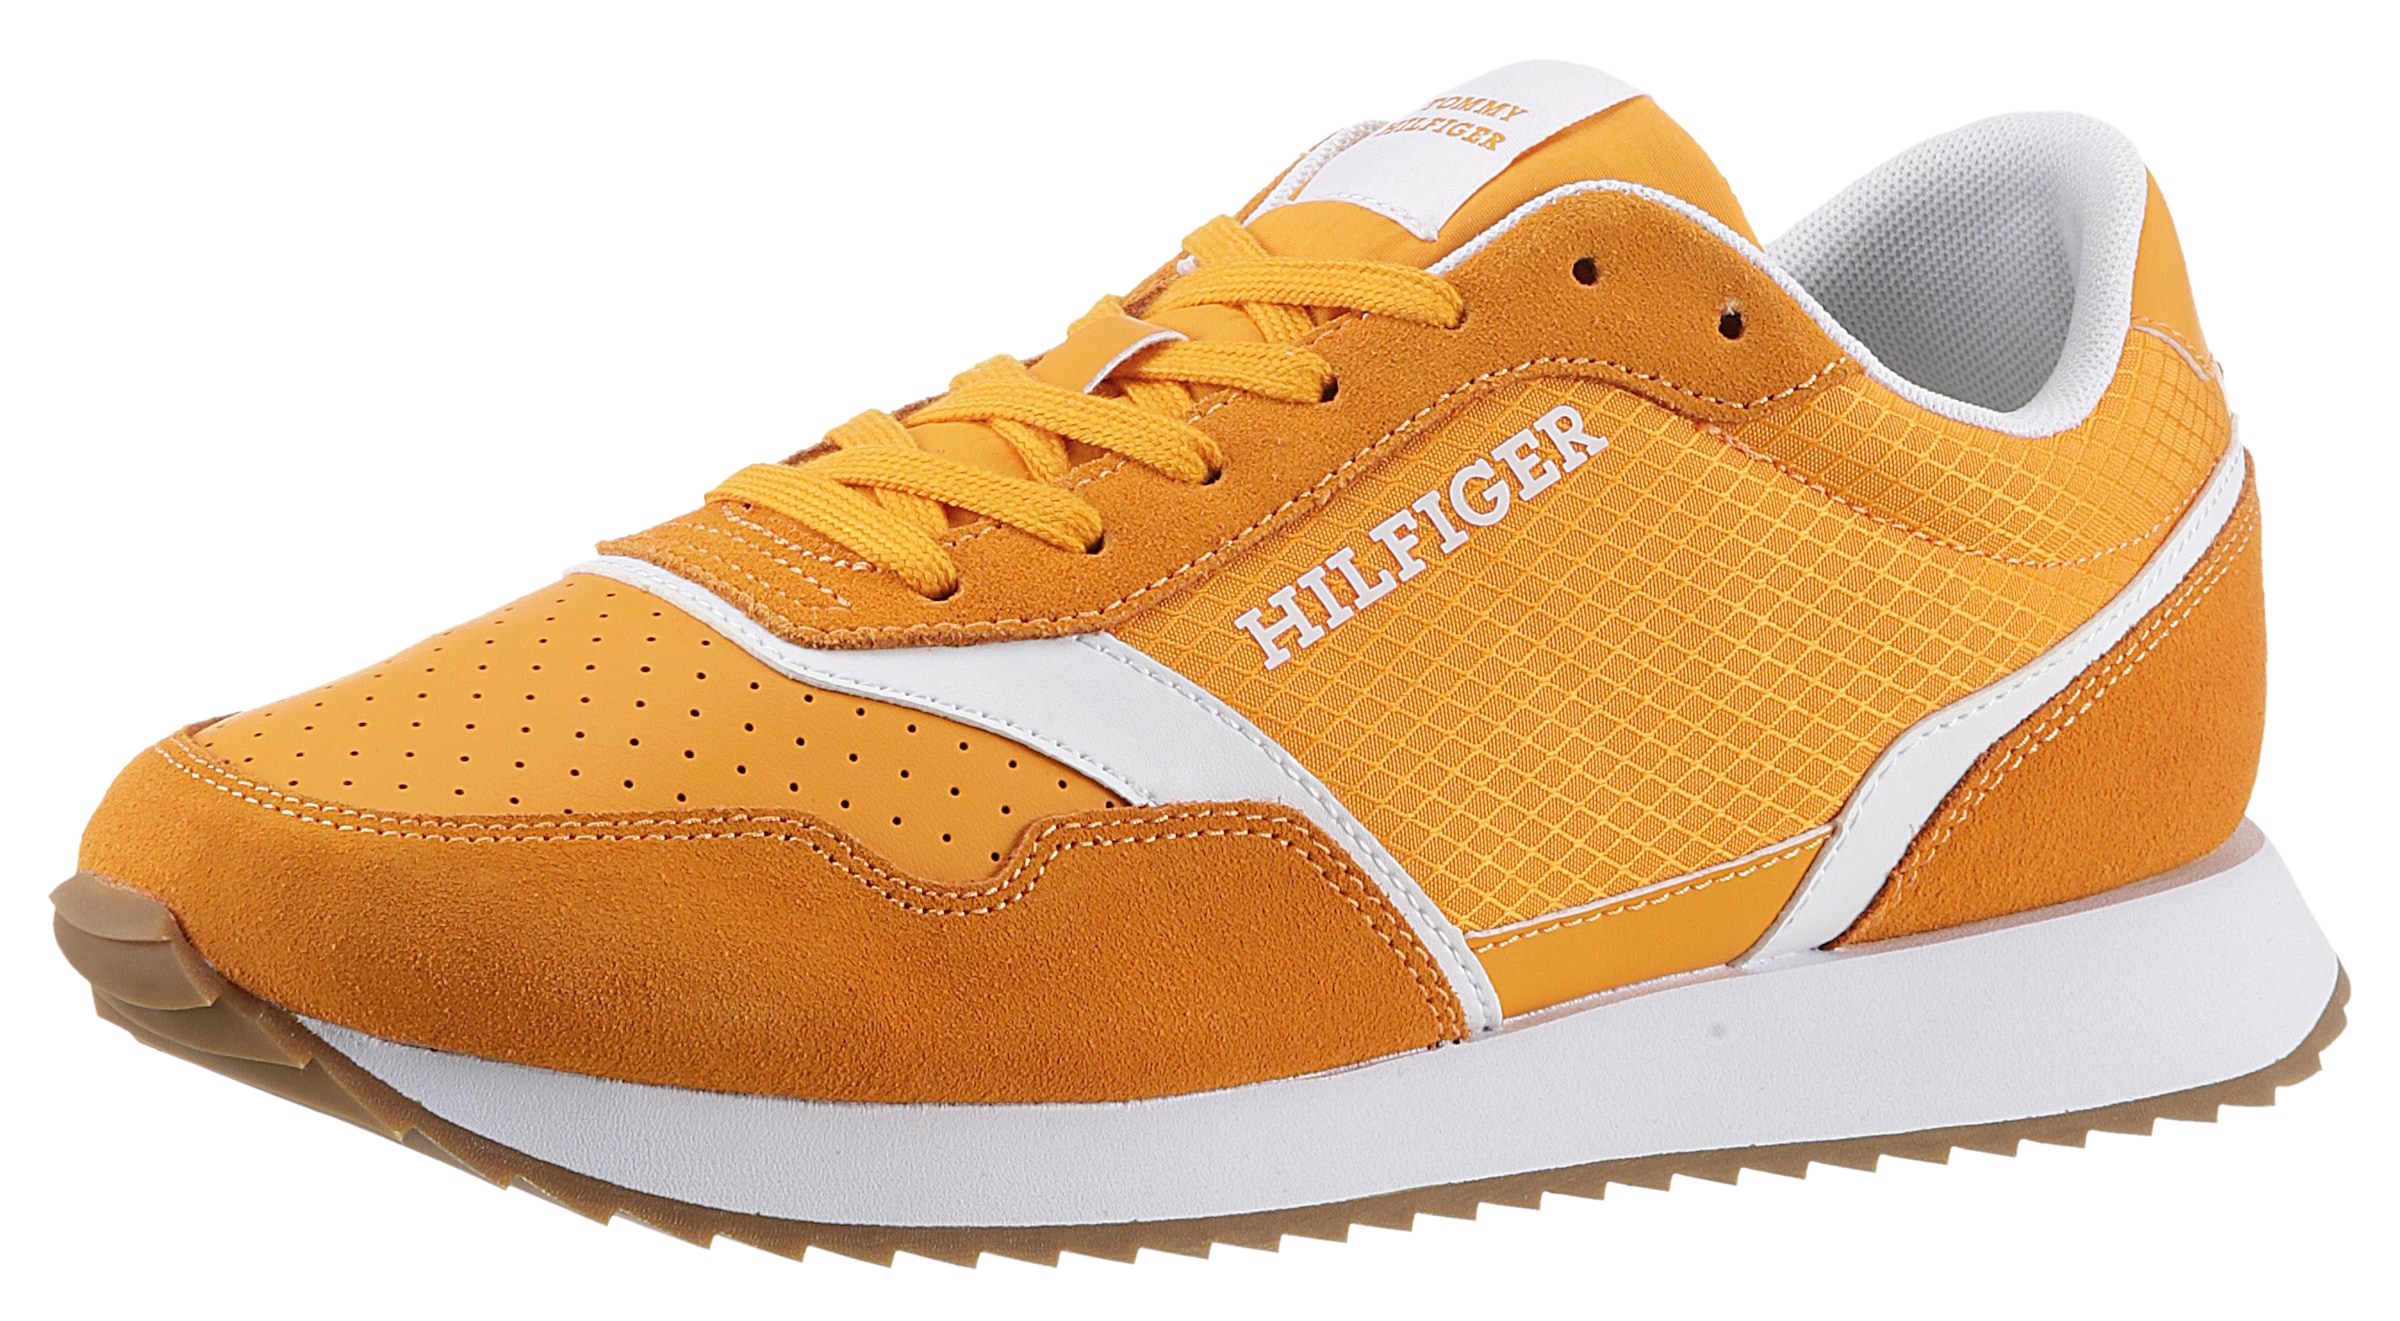 TOMMY HILFIGER Sneaker »RUNNER EVO COLORAMA MIX« in g...